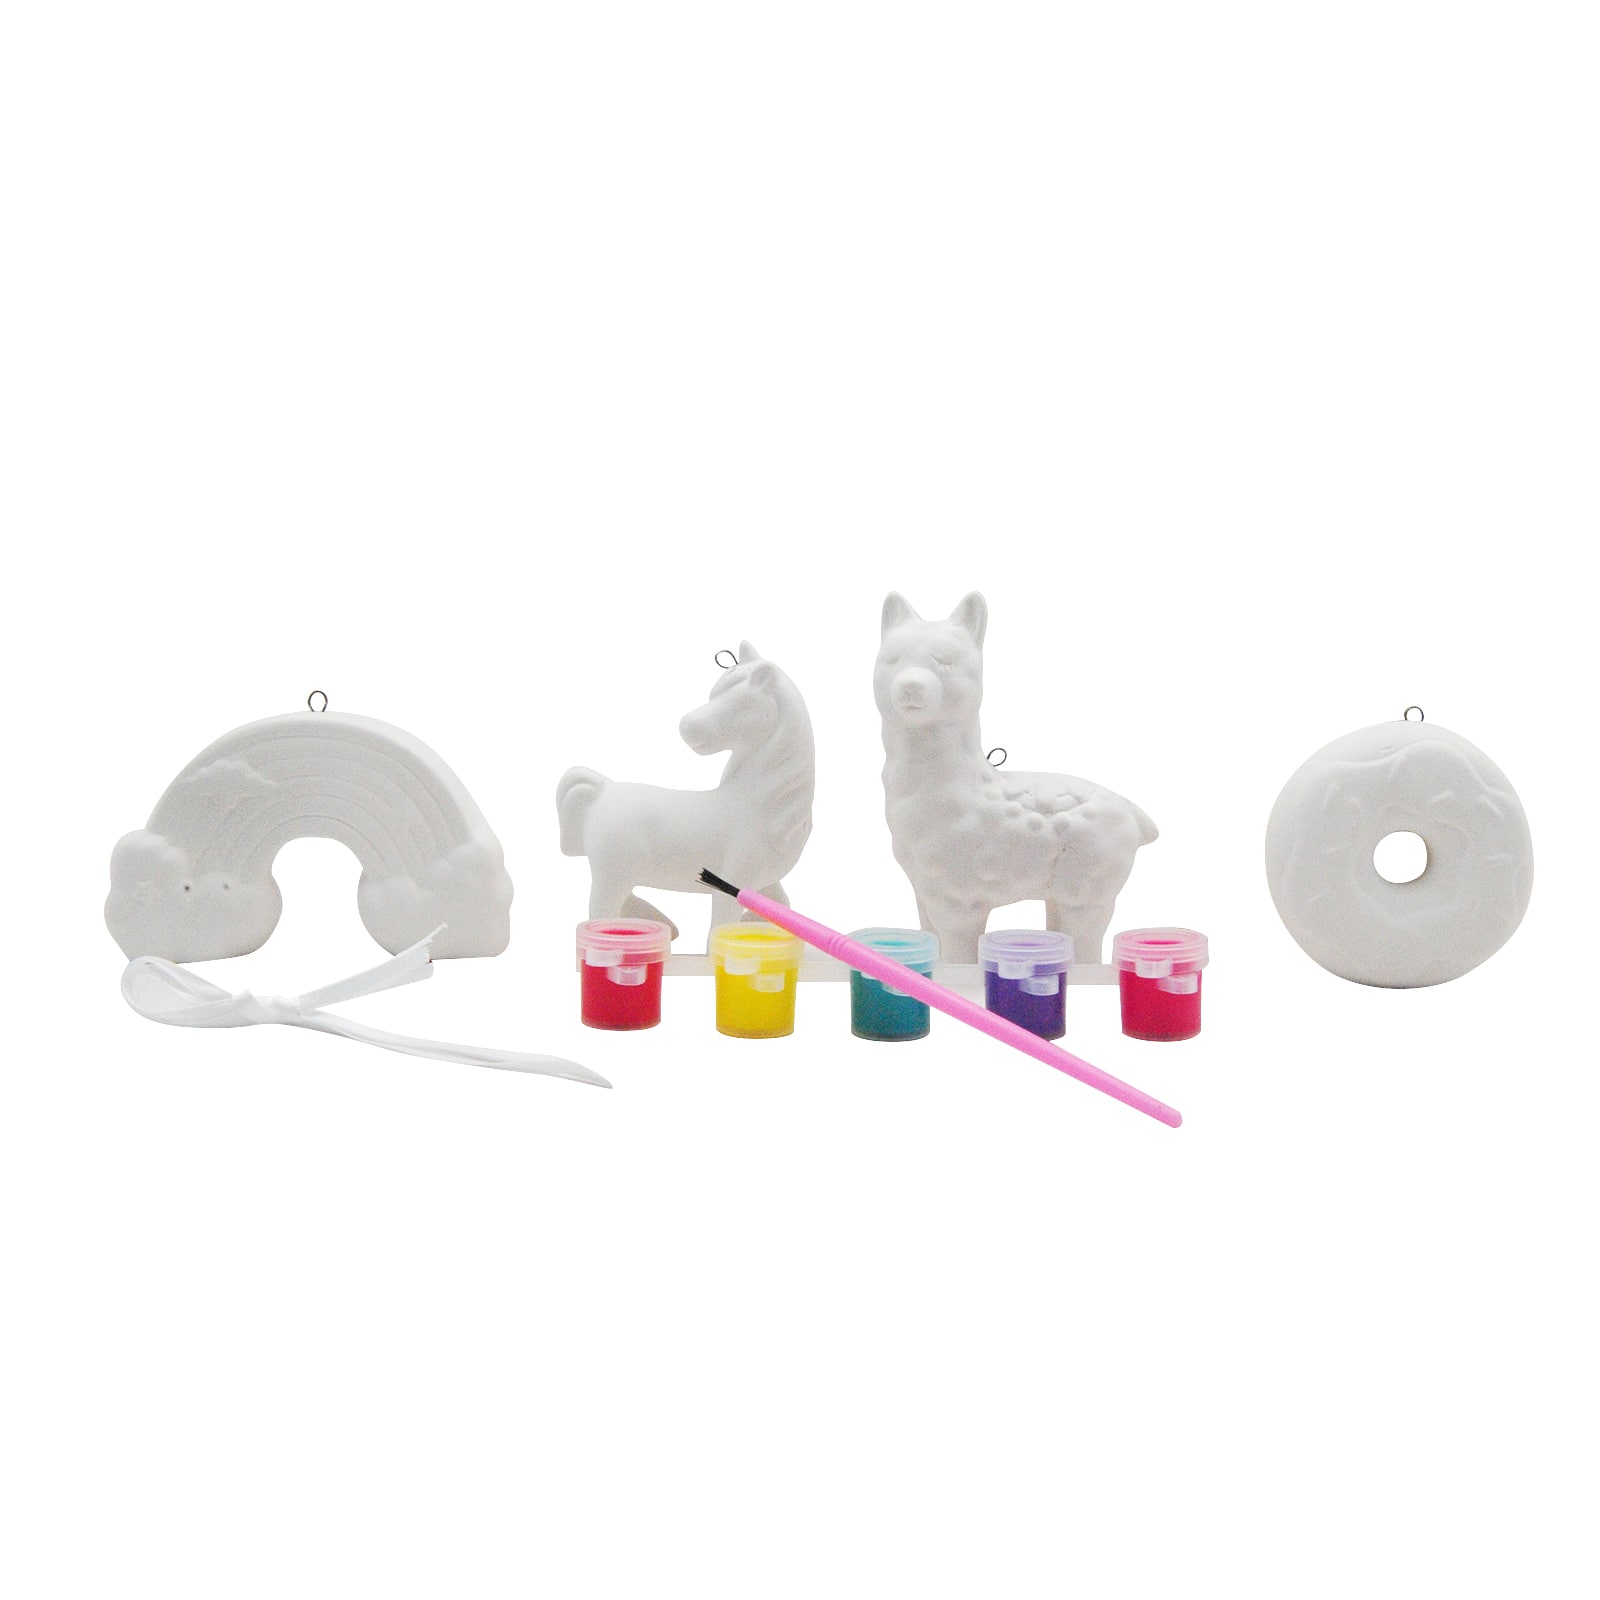 Magical Ceramic 3D Ornaments Kit by Creatology&#x2122;